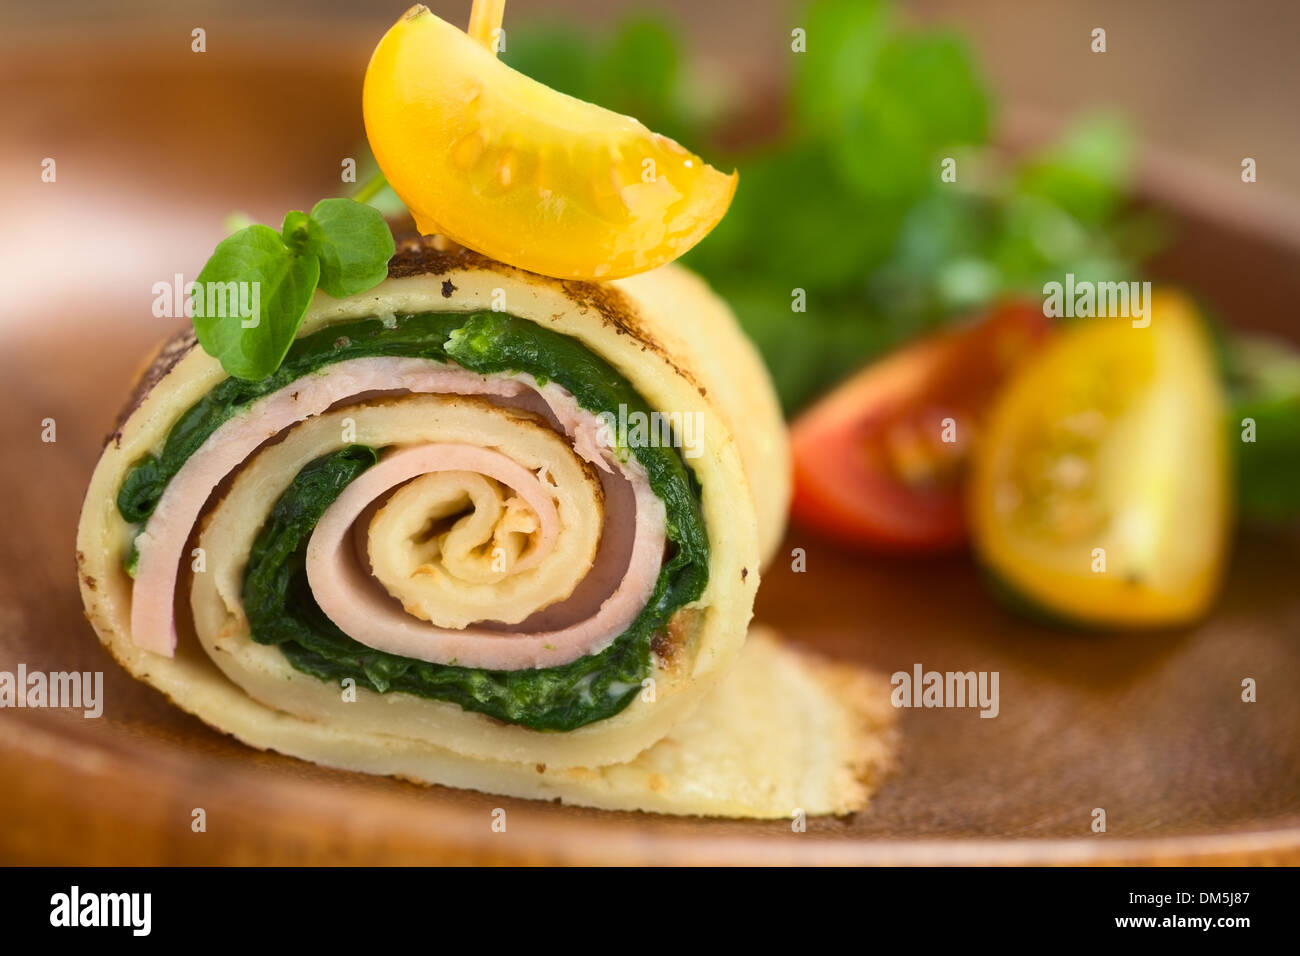 Crepe roll as finger food filled with spinach and ham garnished with cherry tomato and watercress served on wooden plate Stock Photo